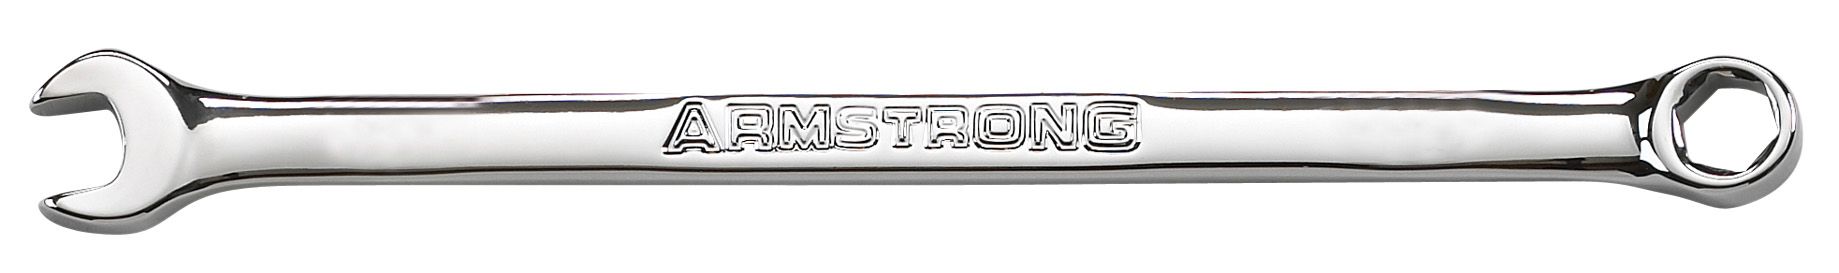 Armstrong 16 mm 6 pt. Full Polish Long Combination Wrench